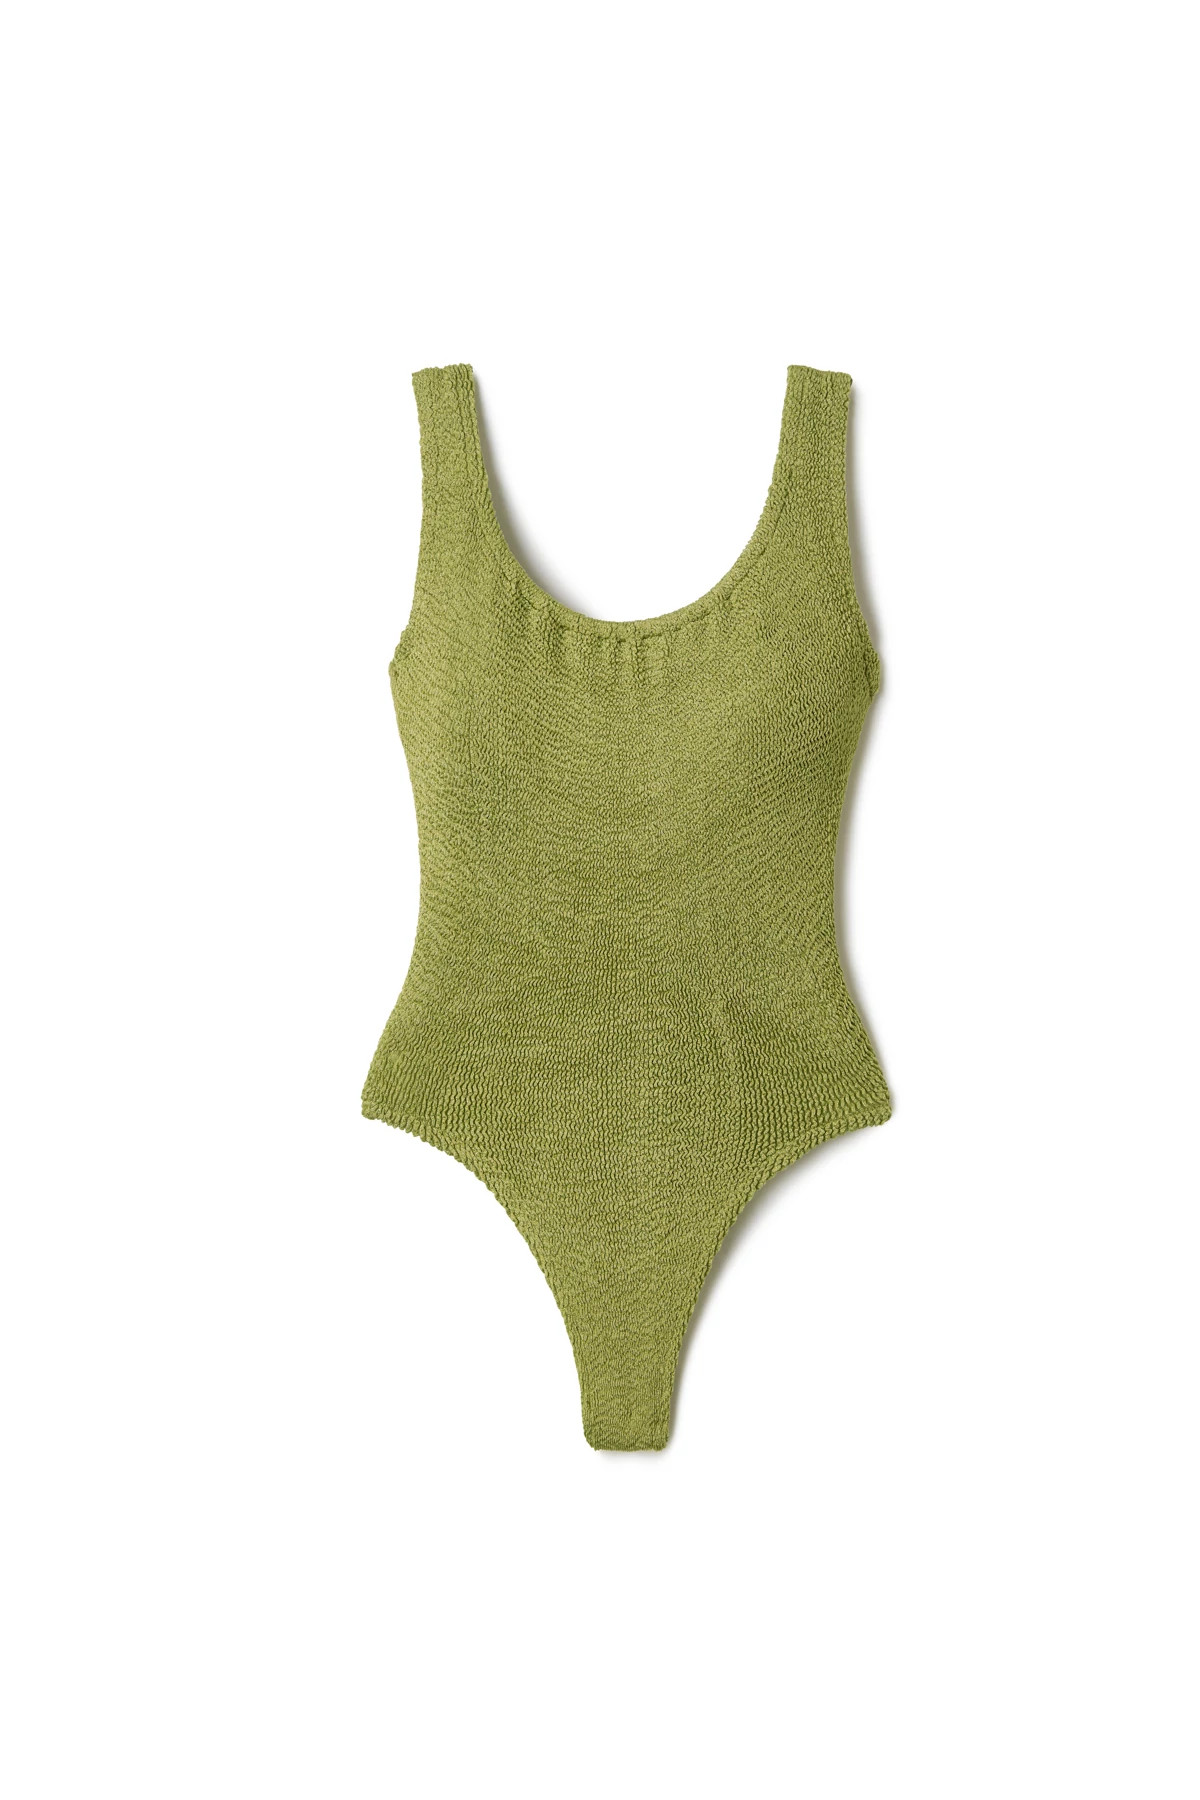 METALLIC MOSS Classic Square Neck One Piece Swimsuit image number 3